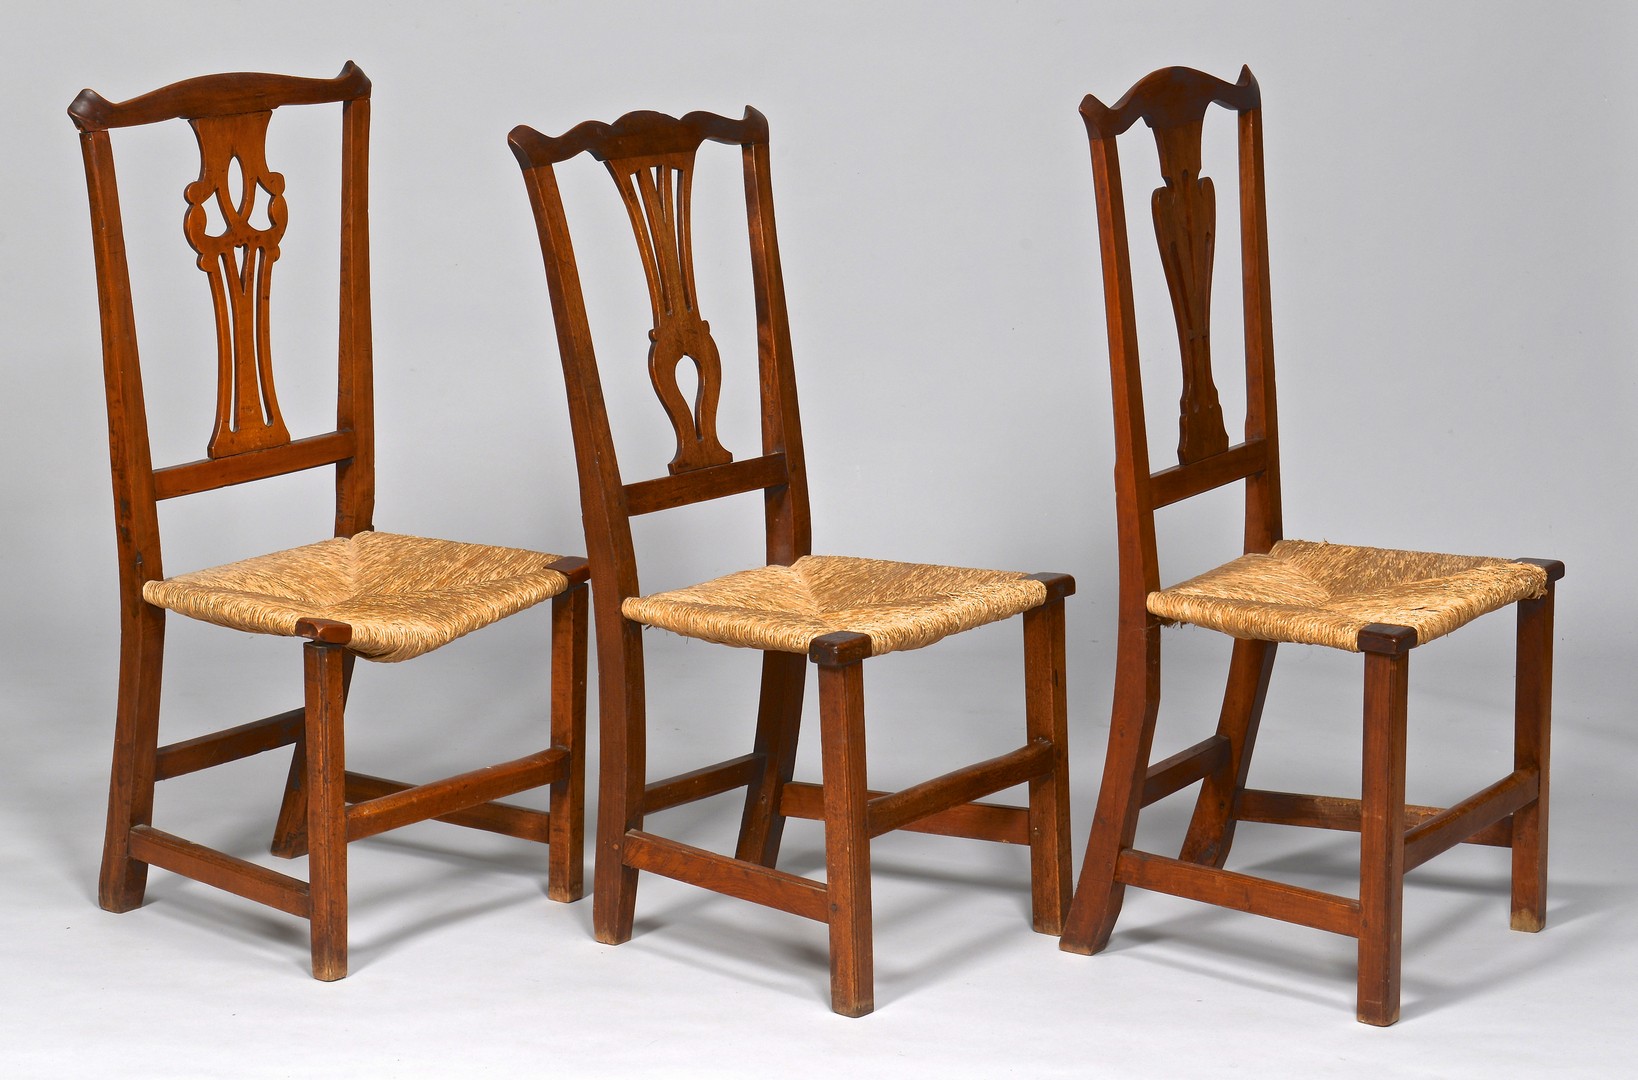 Lot 279: 6 Chippendale Country Side Chairs, 18th c.